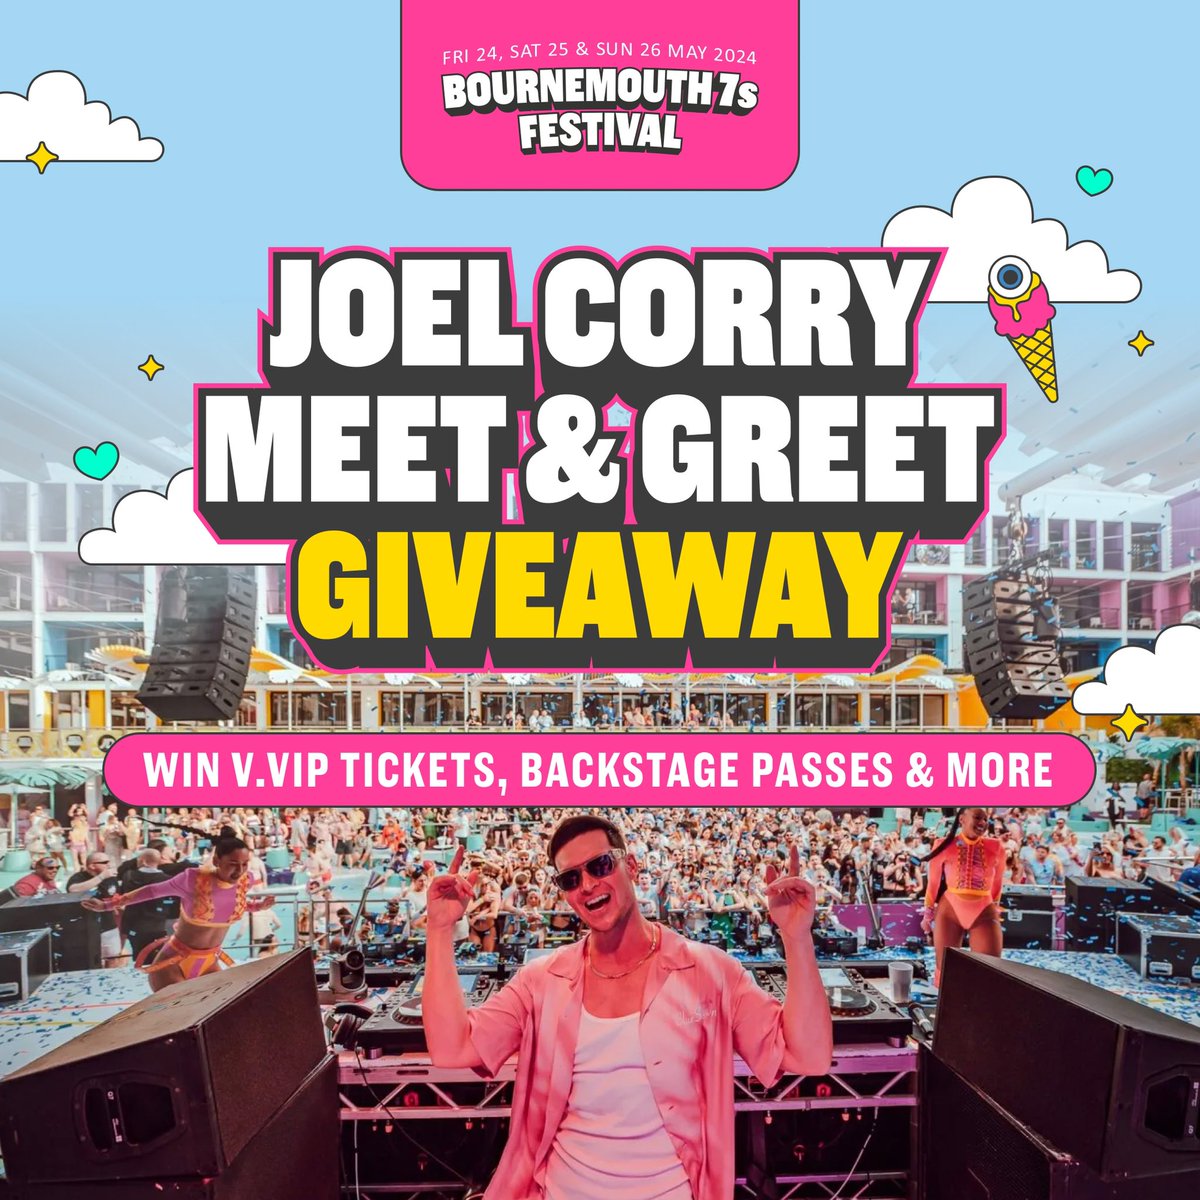 𝗪𝗜𝗡 a meet and greet package with @JoelCorry 👀🤩 To celebrate Joel Corry headlining B7s 2024 on Saturday 25th May, we’re giving away an INCREDIBLE meet and greet package! To enter, head over to our Instagram: instagram.com/p/C5QbZ7iIA7R/…